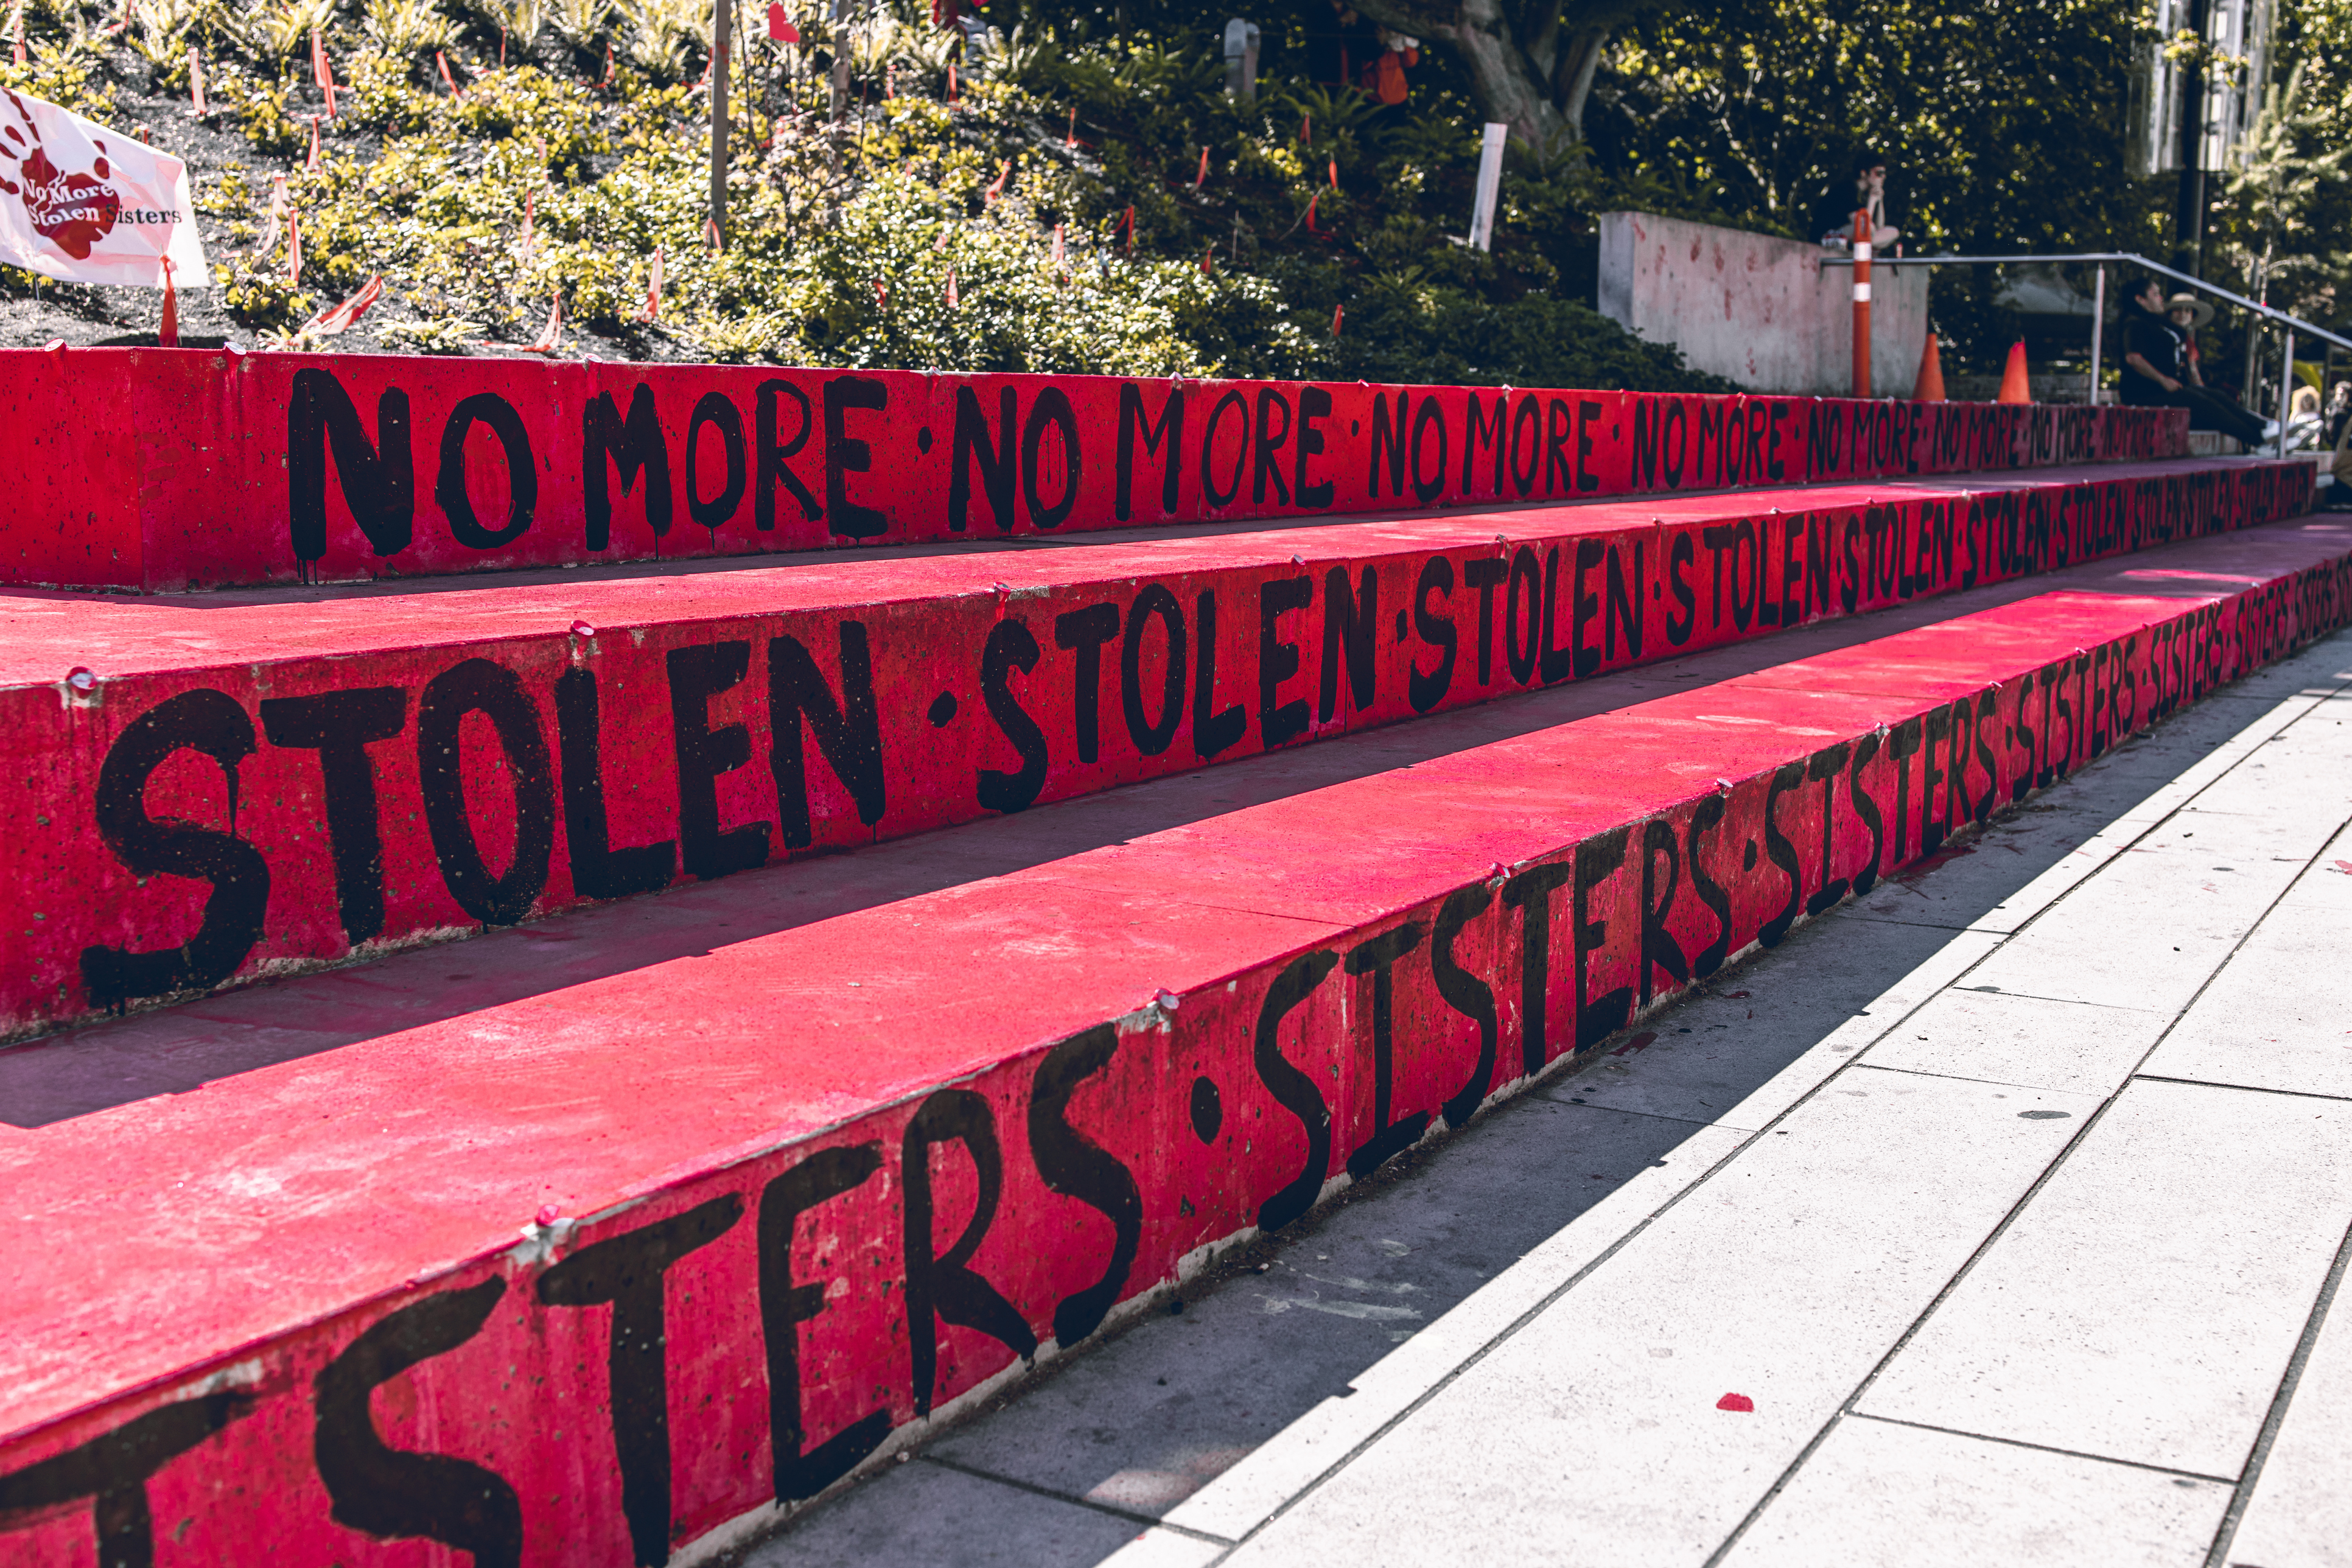 Steps painted red with text "No more stolen sisters" on the Robson Square Memorial to honour Missing and Murdered Indigenous Women in US and Canada